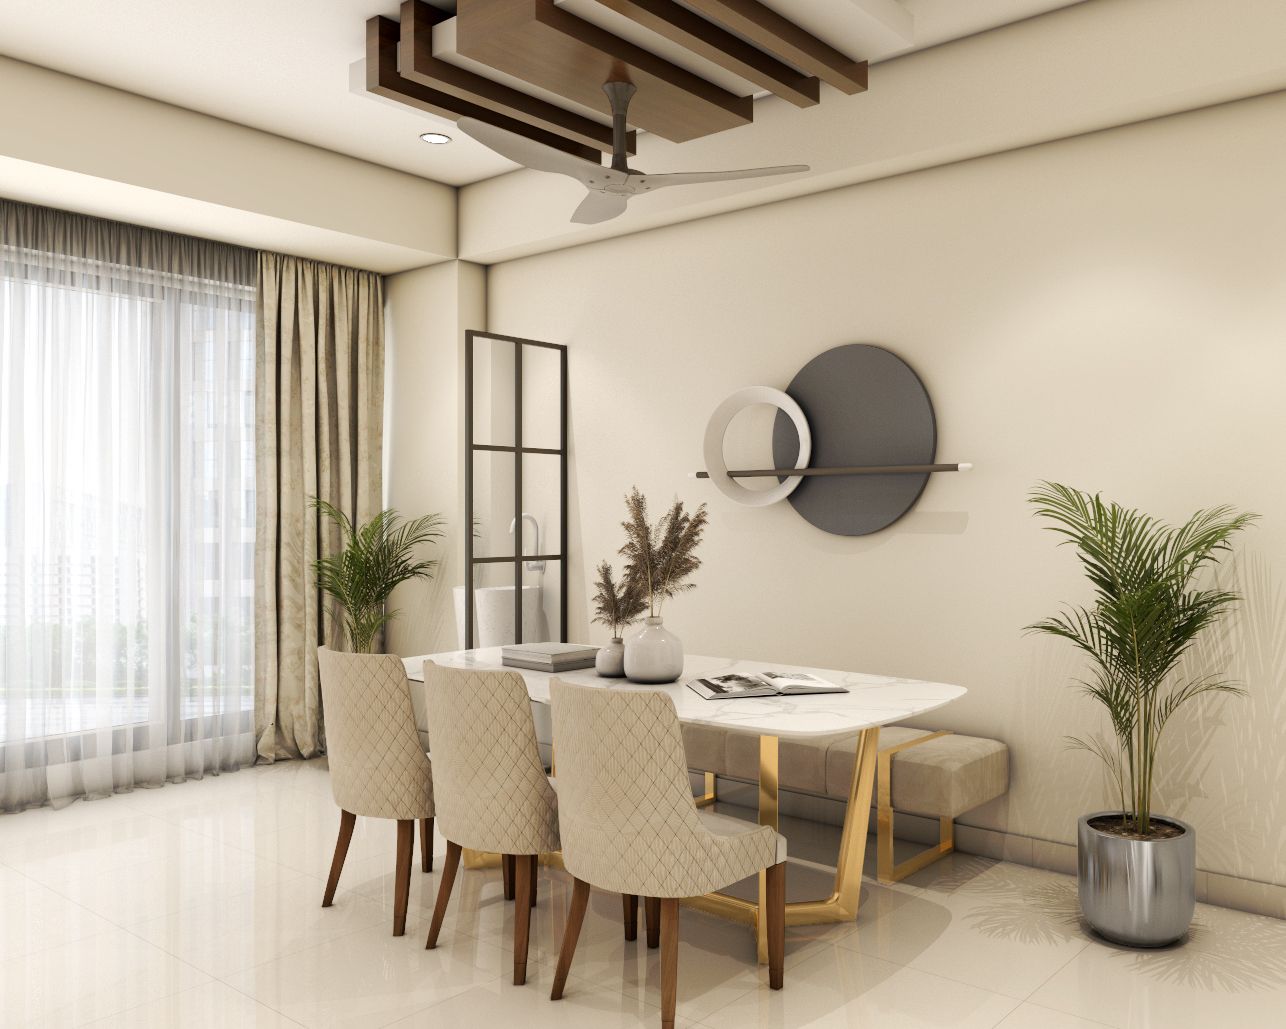 Contemporary 3-Seater Beige And White Dining Room Design With Glass Partition